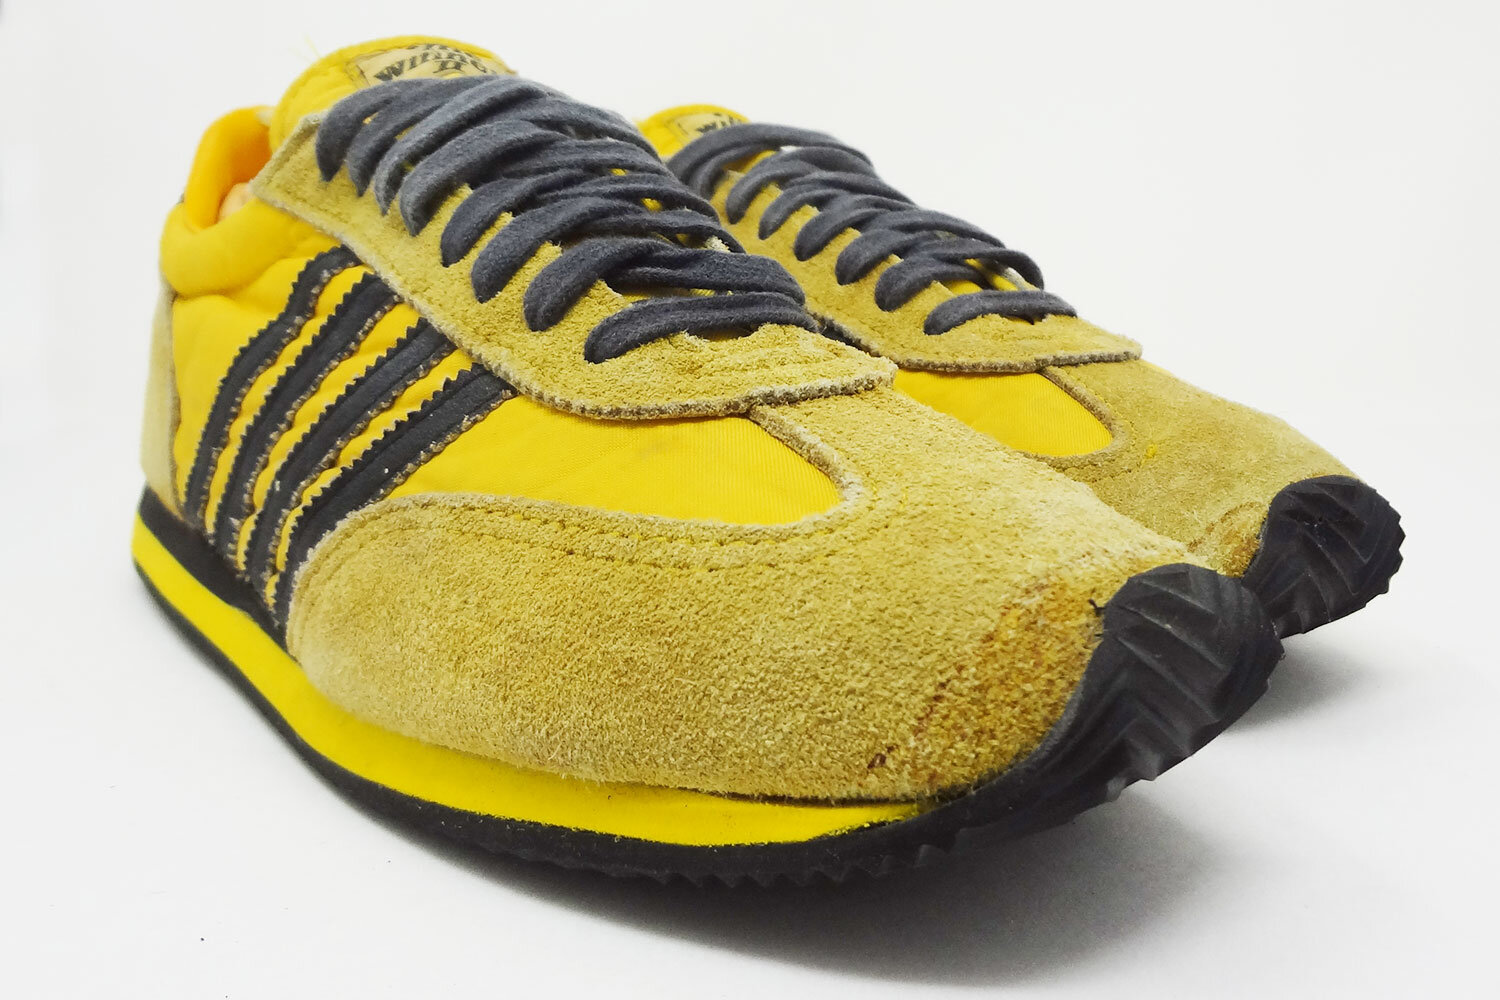 Sears The Winner yellow and black vintage sneakers @ The Deffest